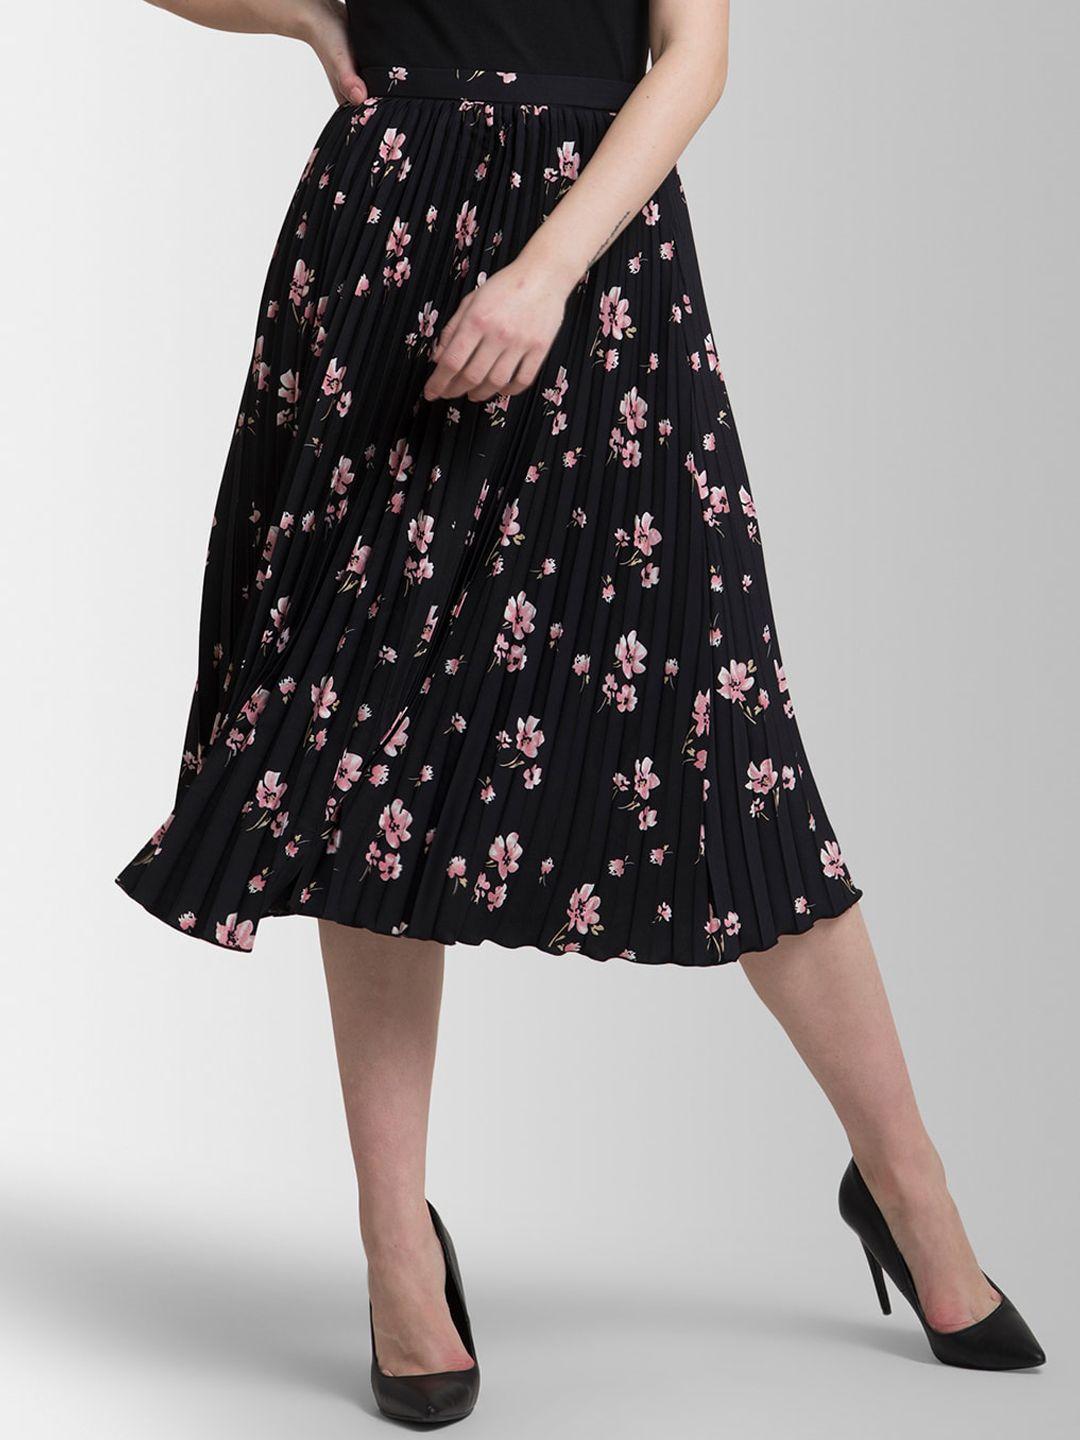 fablestreet-women-black-&-pink-floral-printed-pleated-a-line-midi-skirt